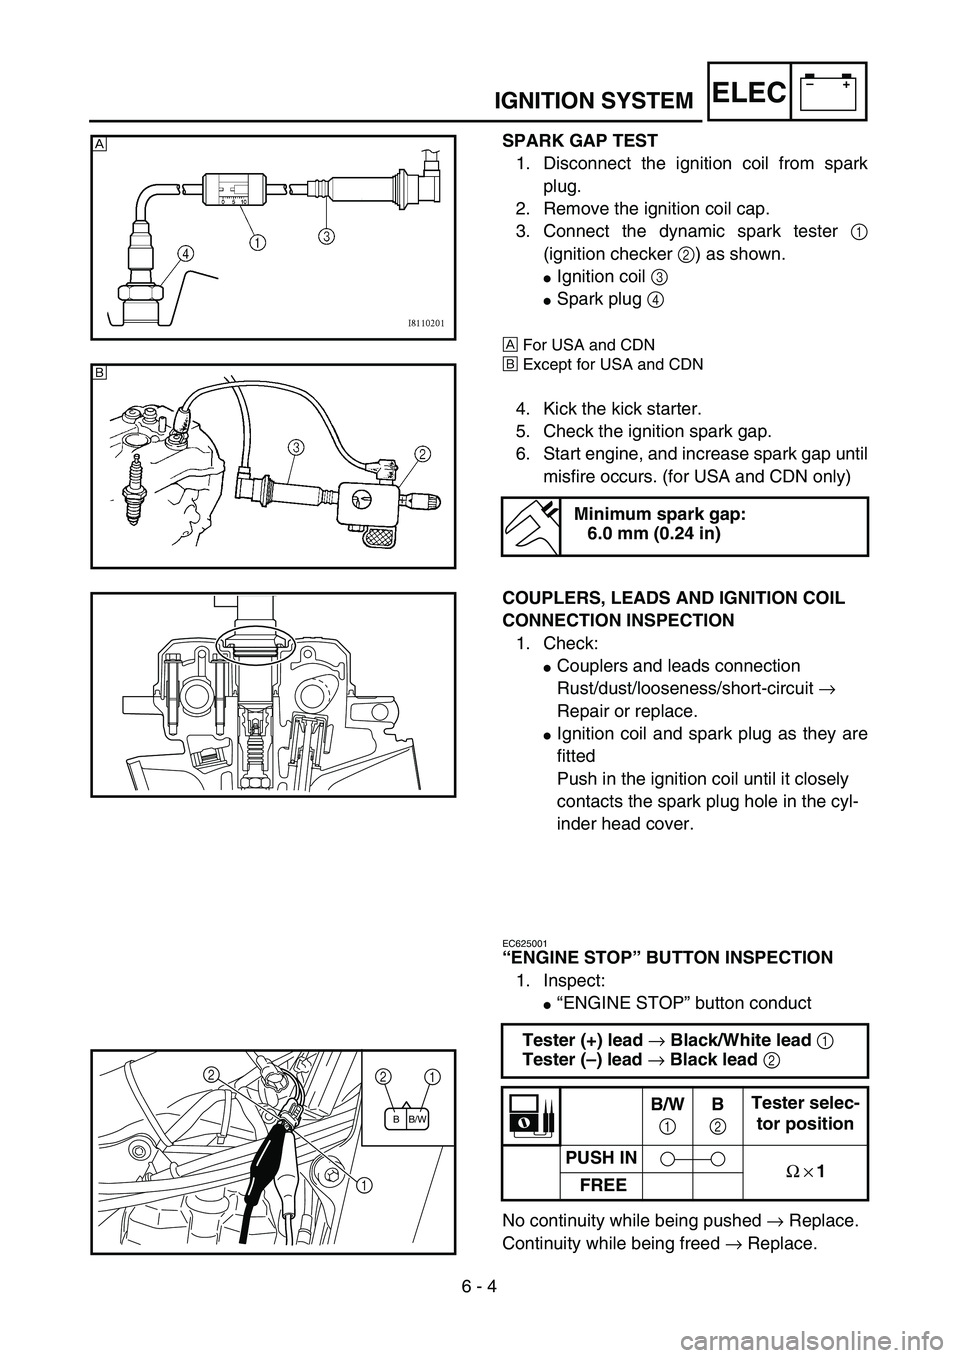 YAMAHA YZ450F 2004 User Guide 6 - 4
–+ELECIGNITION SYSTEM
SPARK GAP TEST
1. Disconnect the ignition coil from spark
plug.
2. Remove the ignition coil cap.
3. Connect the dynamic spark tester 1
(ignition checker 2) as shown.
Ign